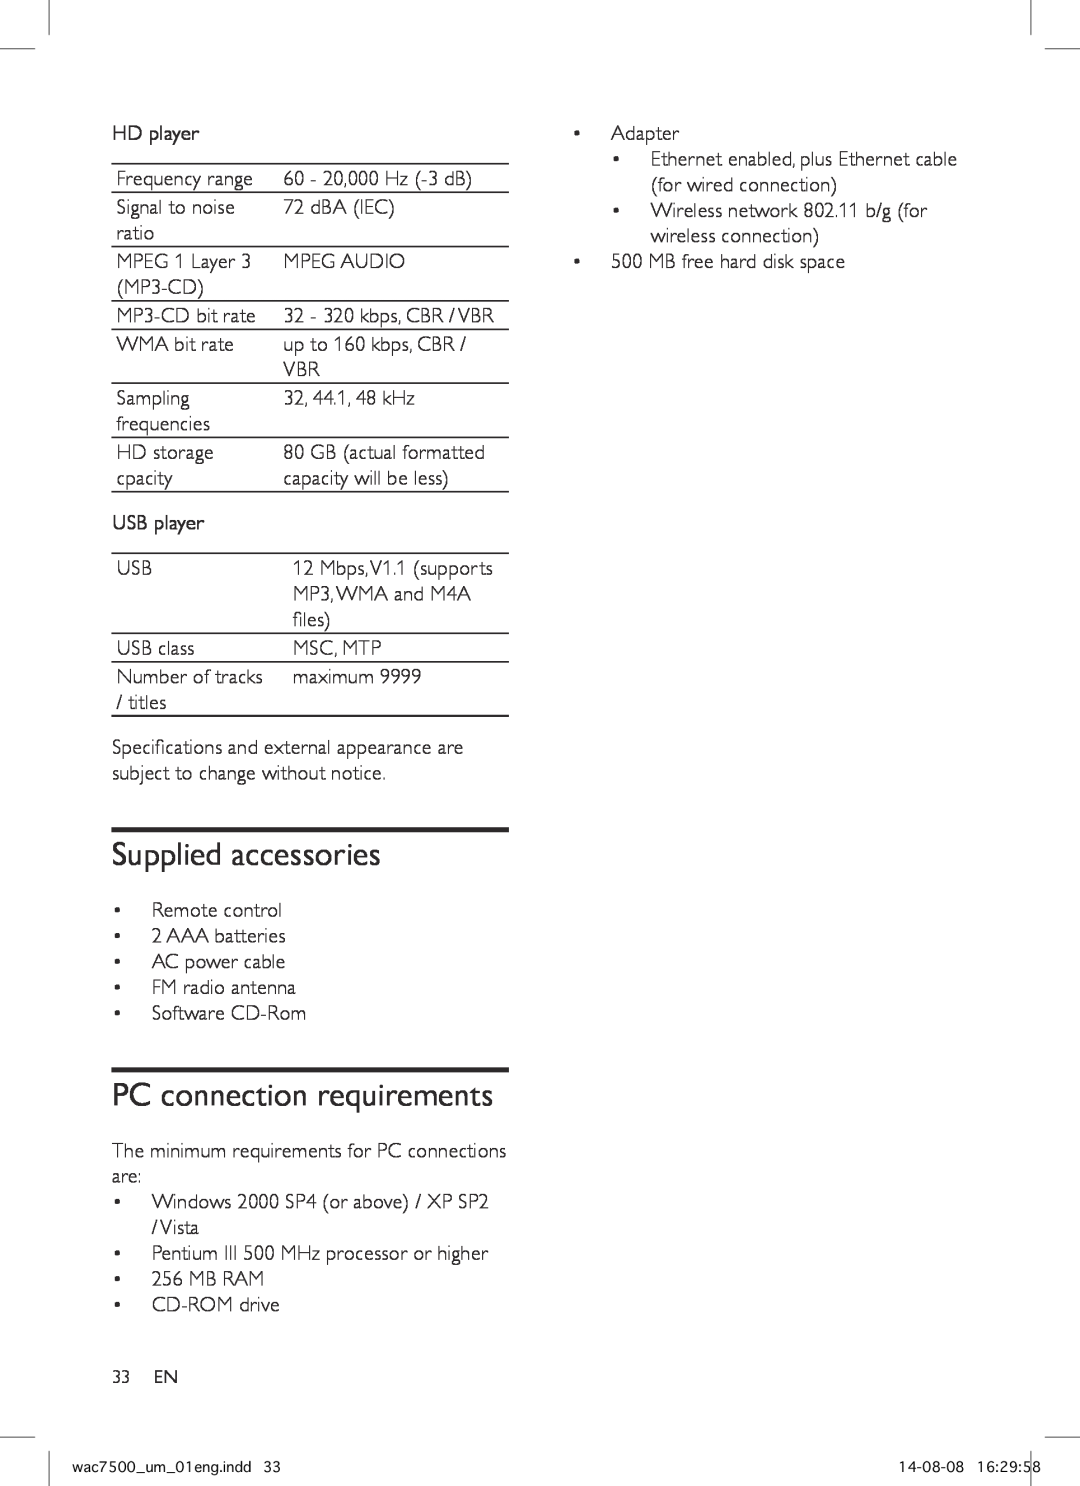 Philips WAC7500 user manual Supplied accessories, PC connection requirements 